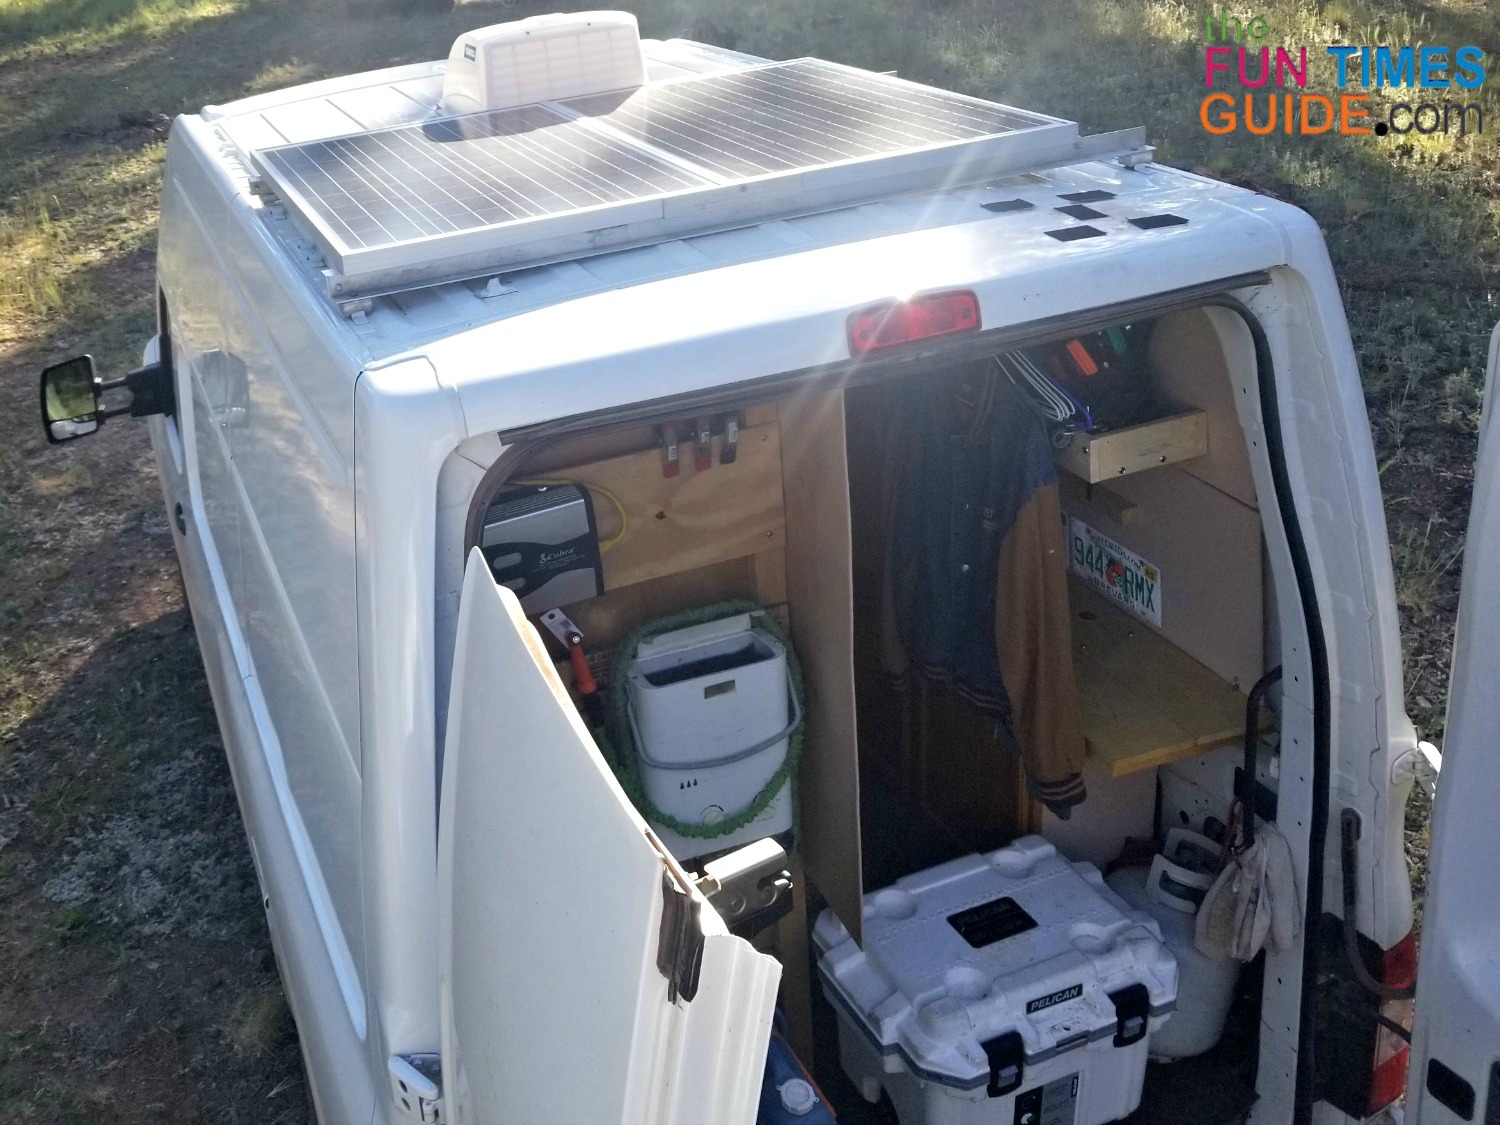 RV Solar Panel Kits – Here’s What You Need To Know Before You Buy A 200-Watt Solar Kit For Boondocking [Video]